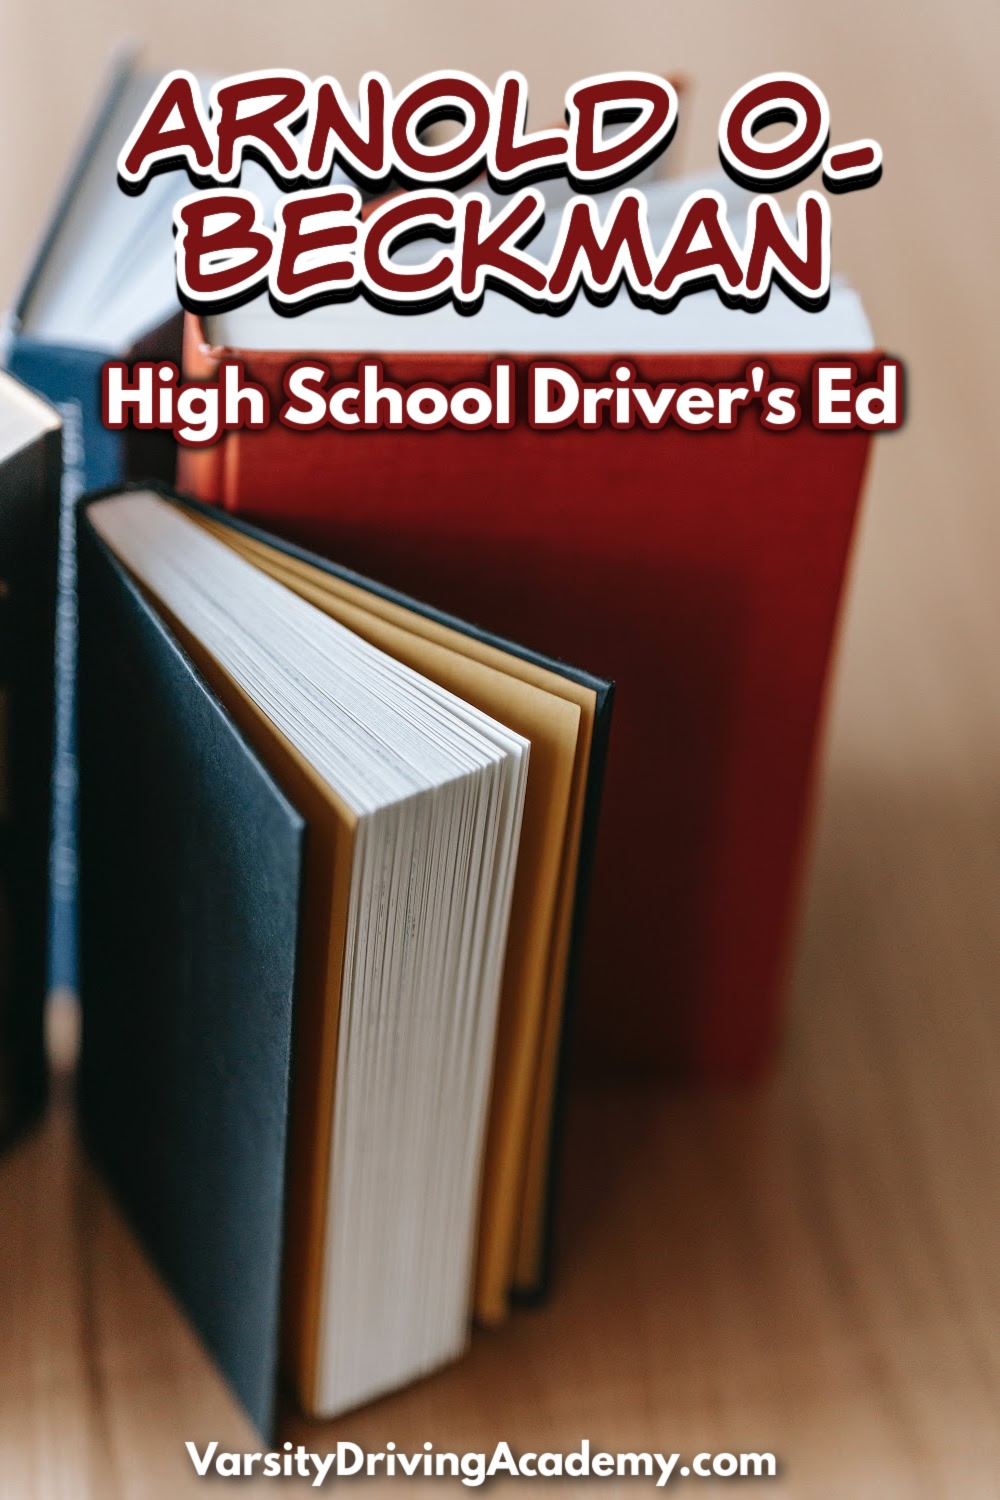 Varsity Driving Academy is where students will find the best Arnold O. Beckman High School driver's education.